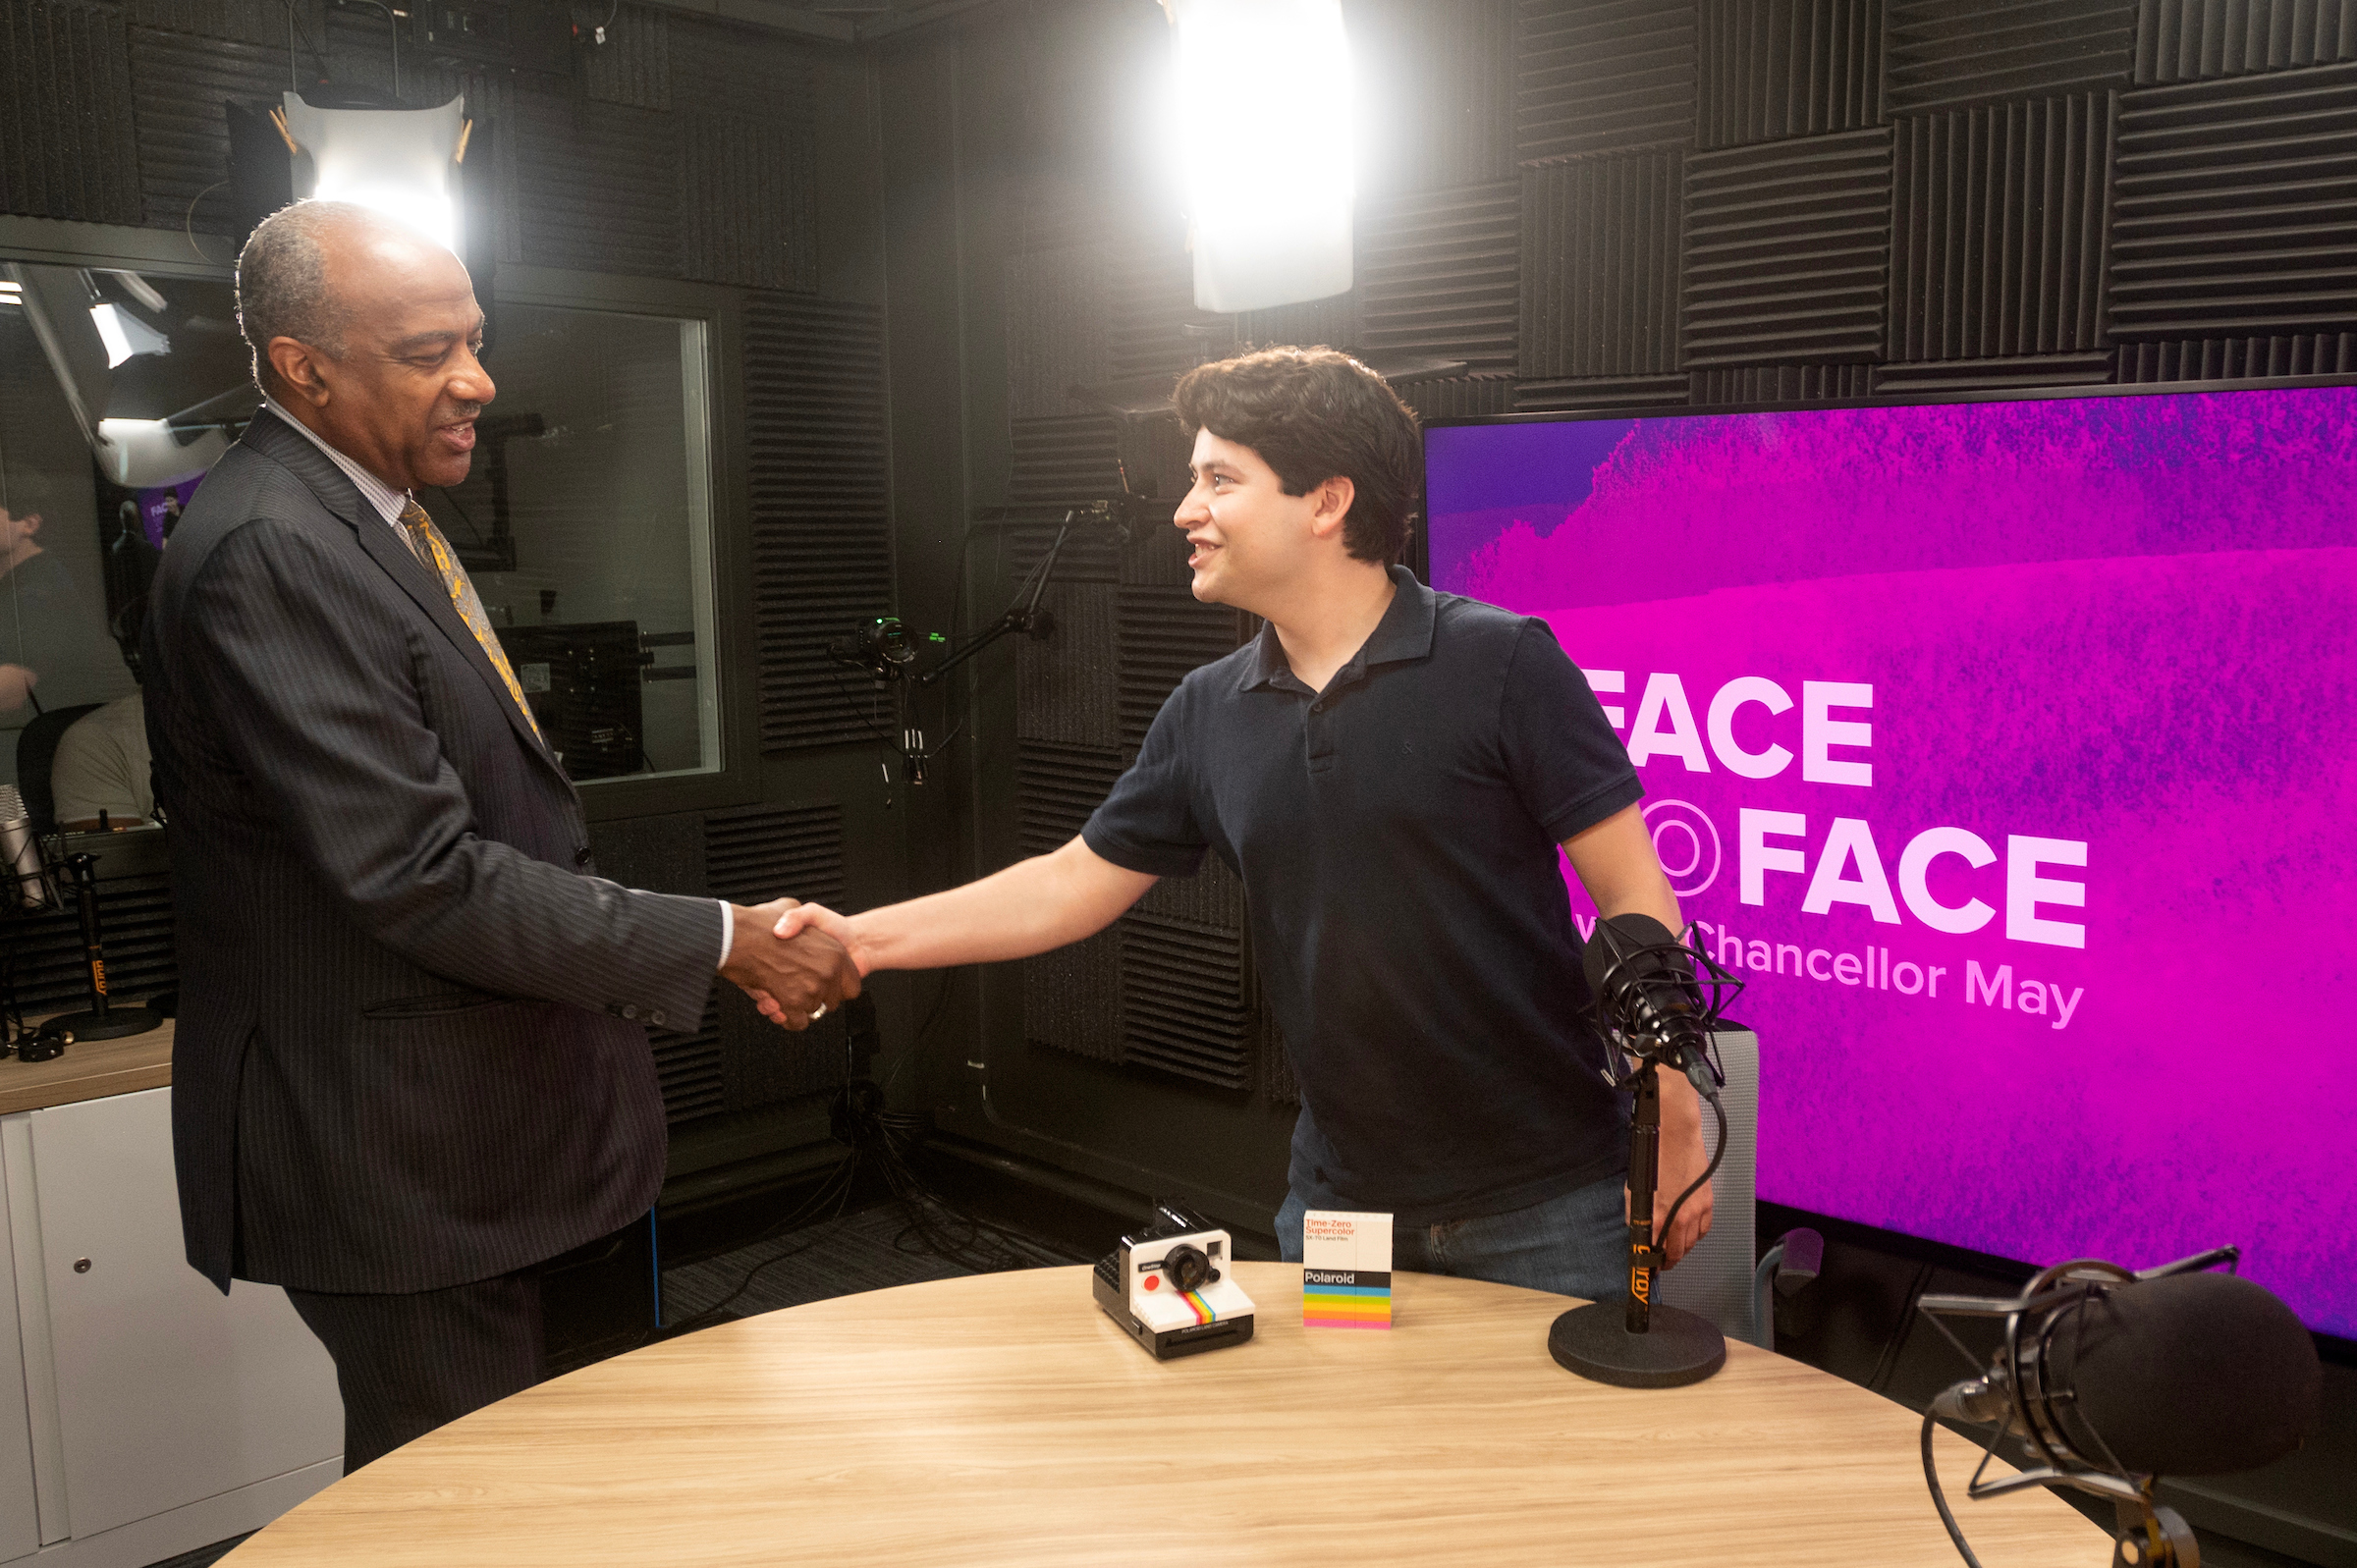 Inside of a recording studio, Chancellor Gary S. May, wearing a dark suit, is standing on the left and extending his hand for a shake with Marc Corfmat, standing to the Chancellor's right, wearing a dark polo shirt against a Face to Face logo backdrop. 